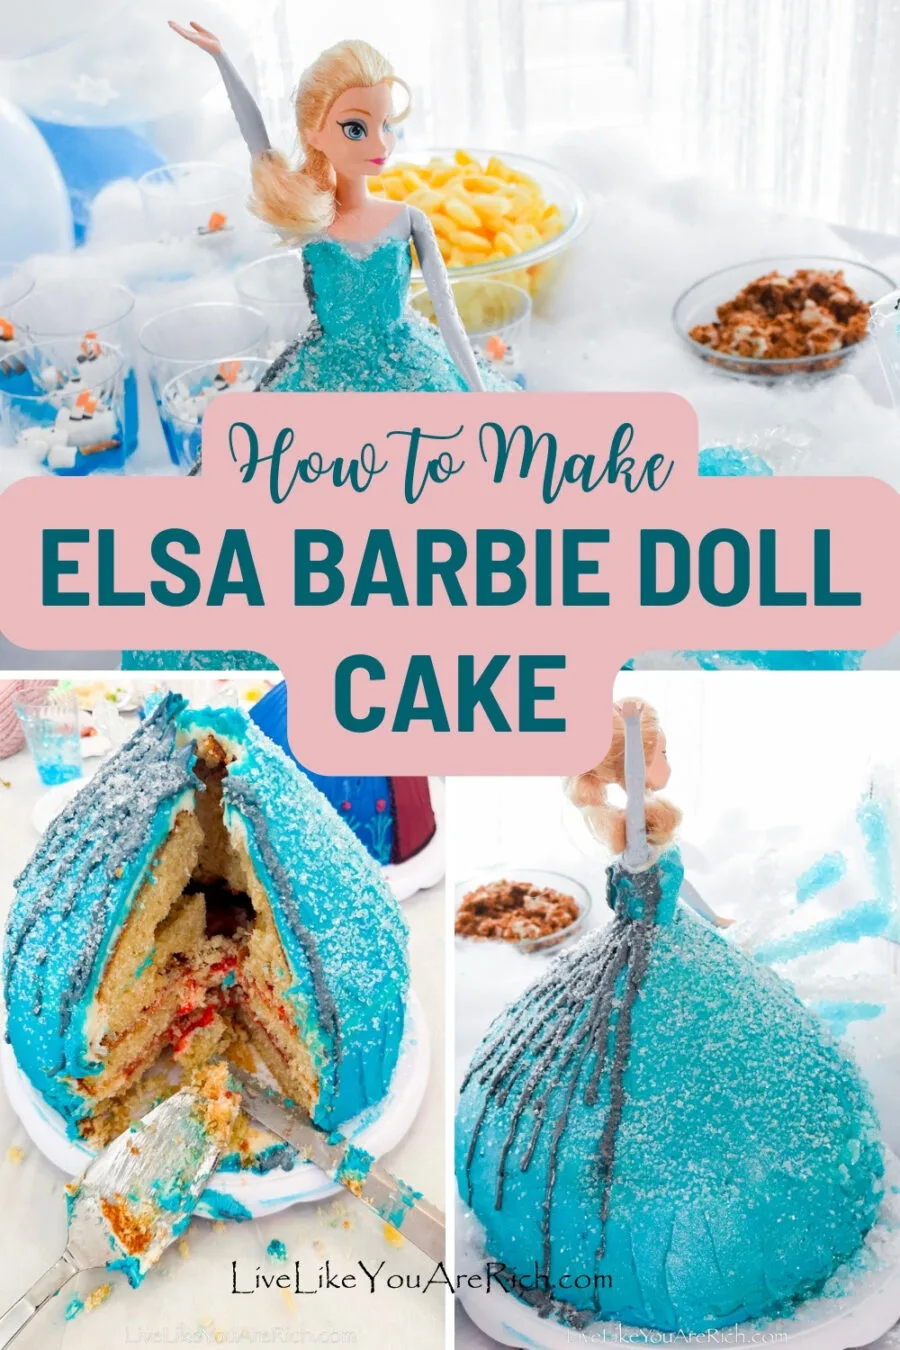 Elsa Barbie Cake from the Movie Frozen